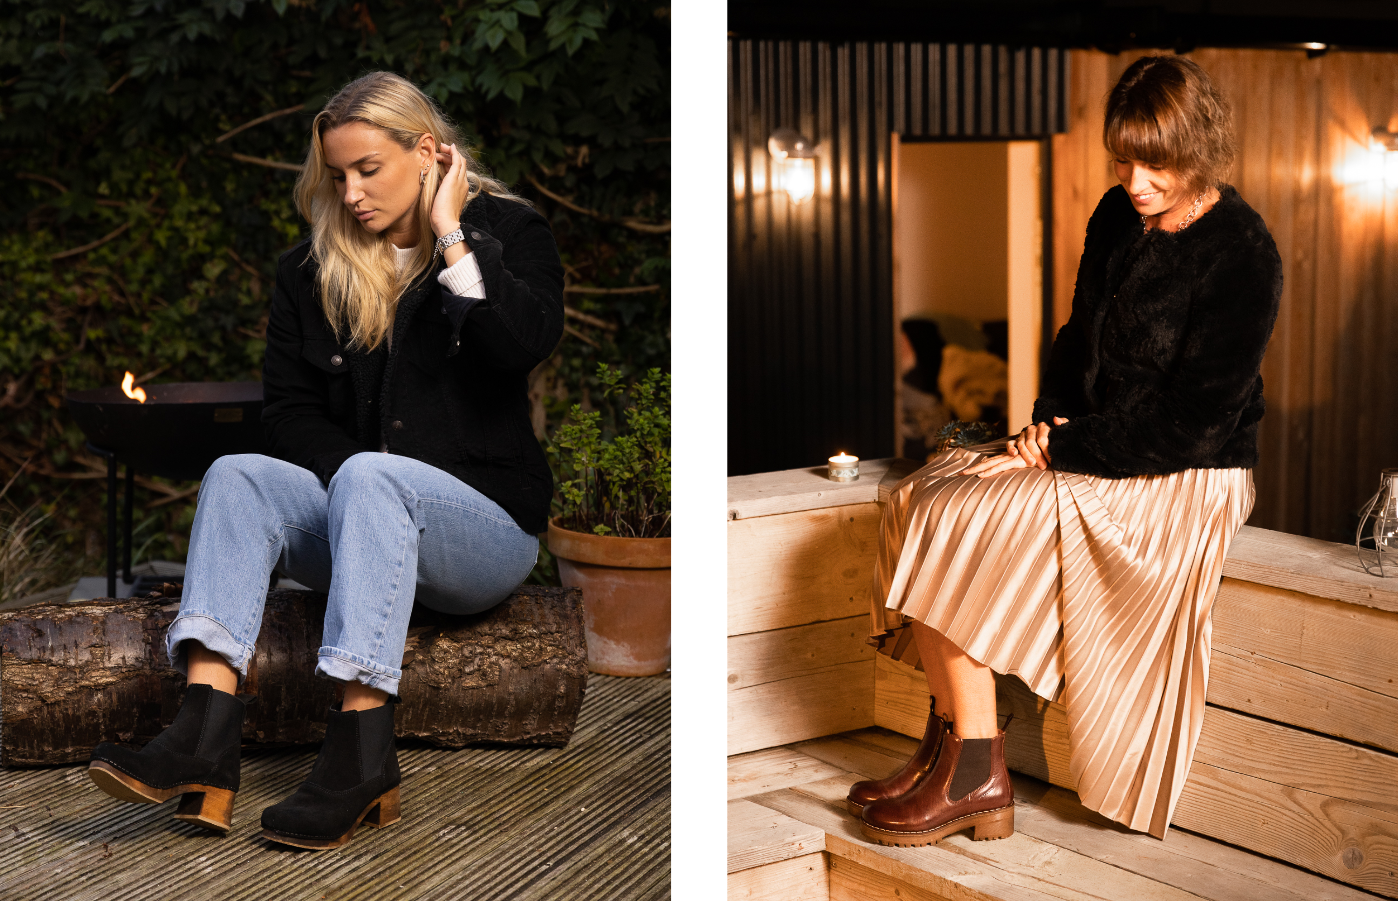 Ingrid Clog Boots for the chilly evenings and Ten points Chelsea boots dressed up for the evening